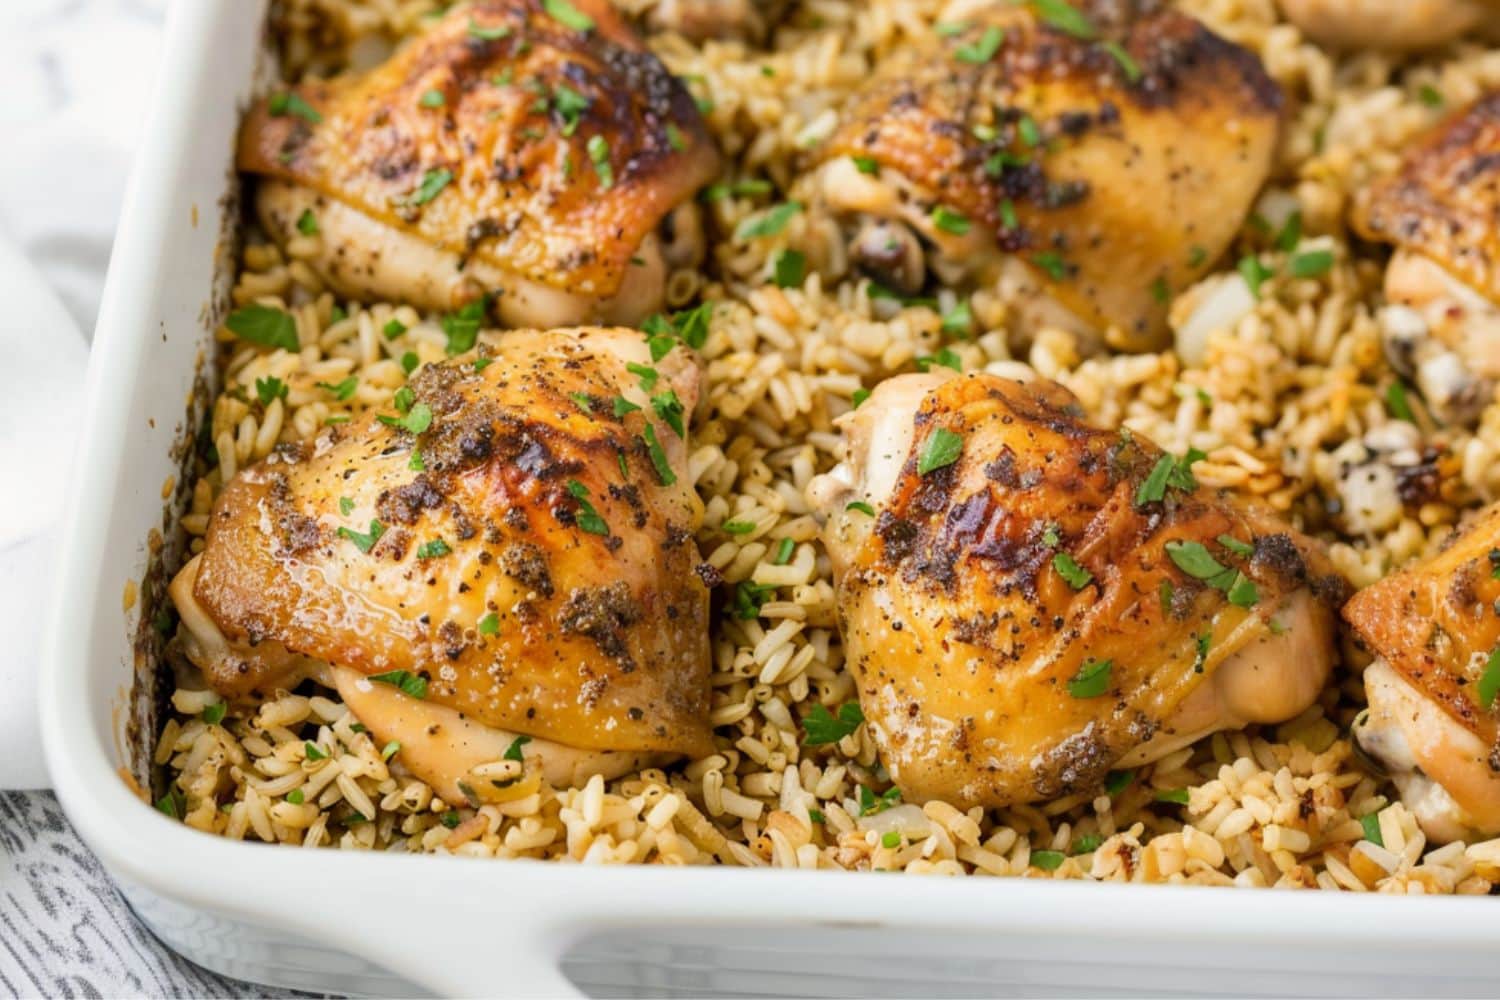 Oven baked chicken and rice in a baking dish.